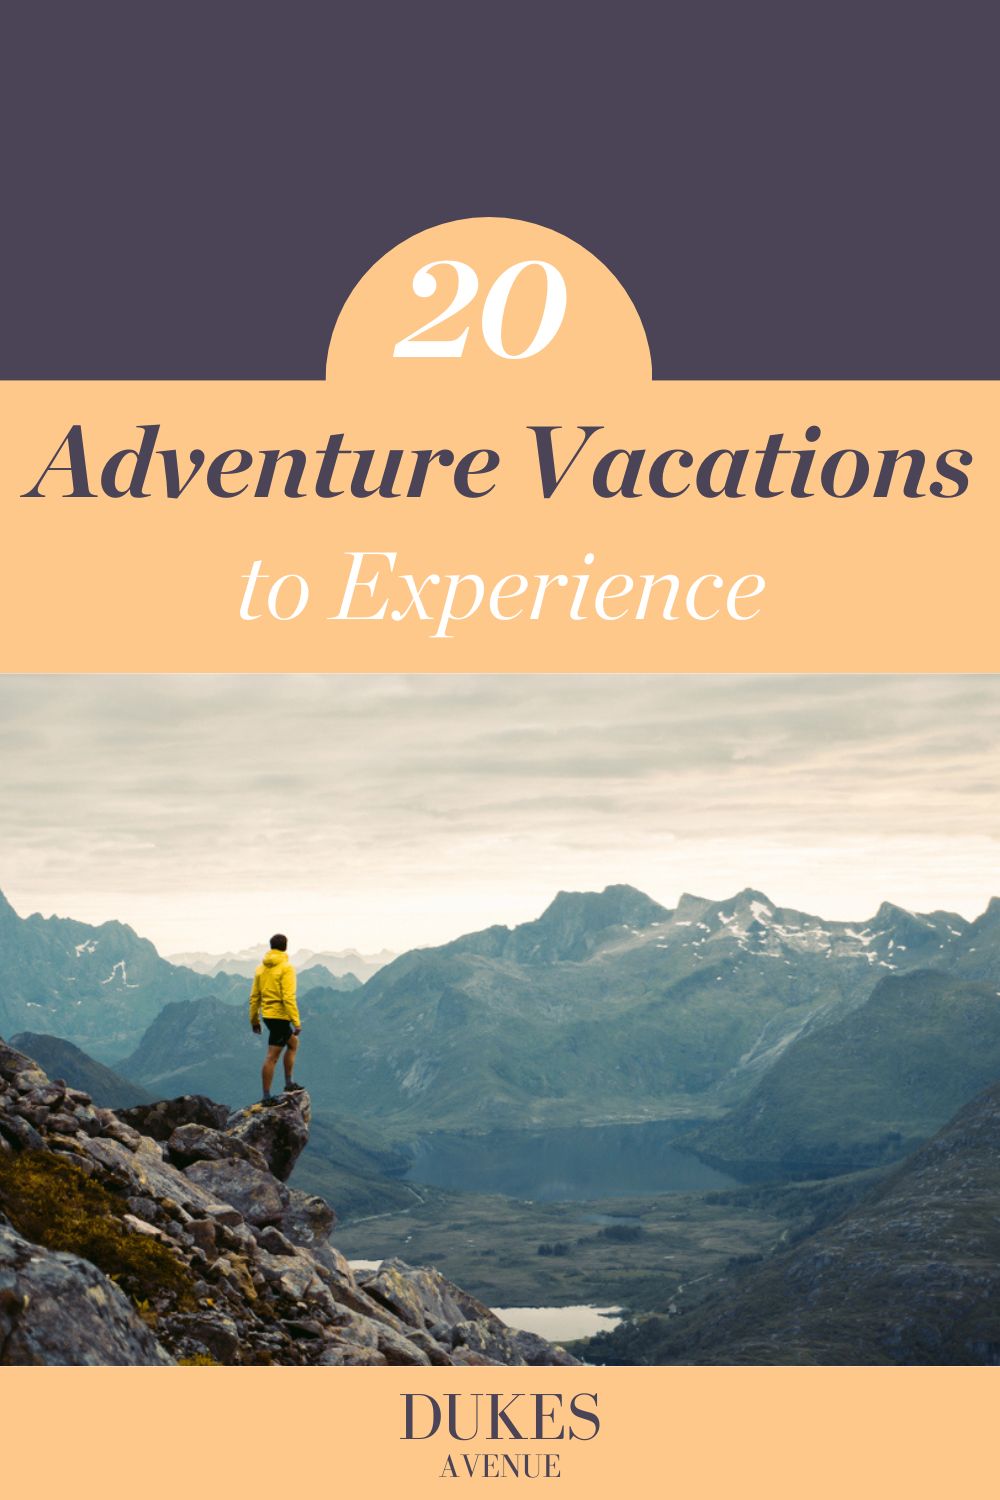 Image of man trekking with text overlay '20 Adventure Vacations to Experience'